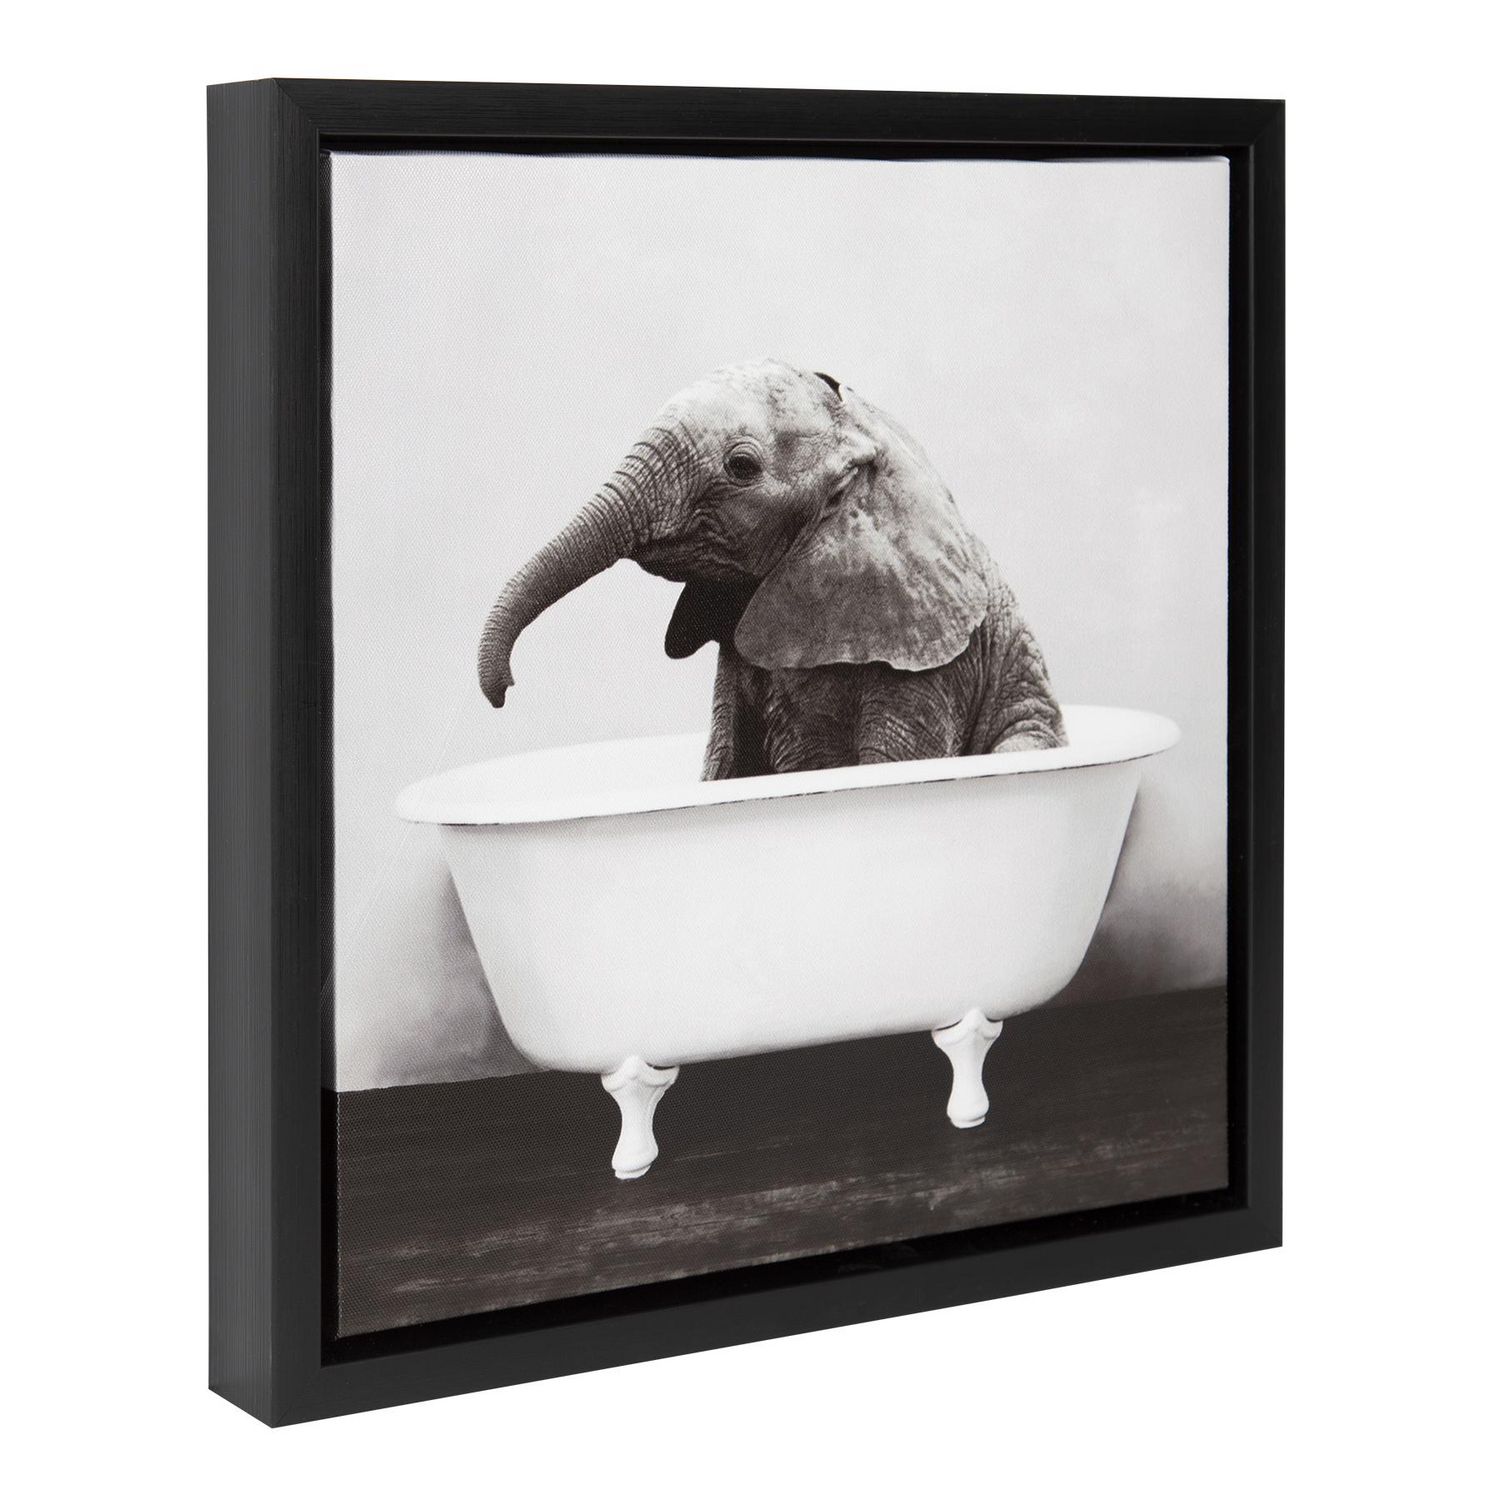 hometrends Baby Elephant in the Tub Framed Canvas Wall Art